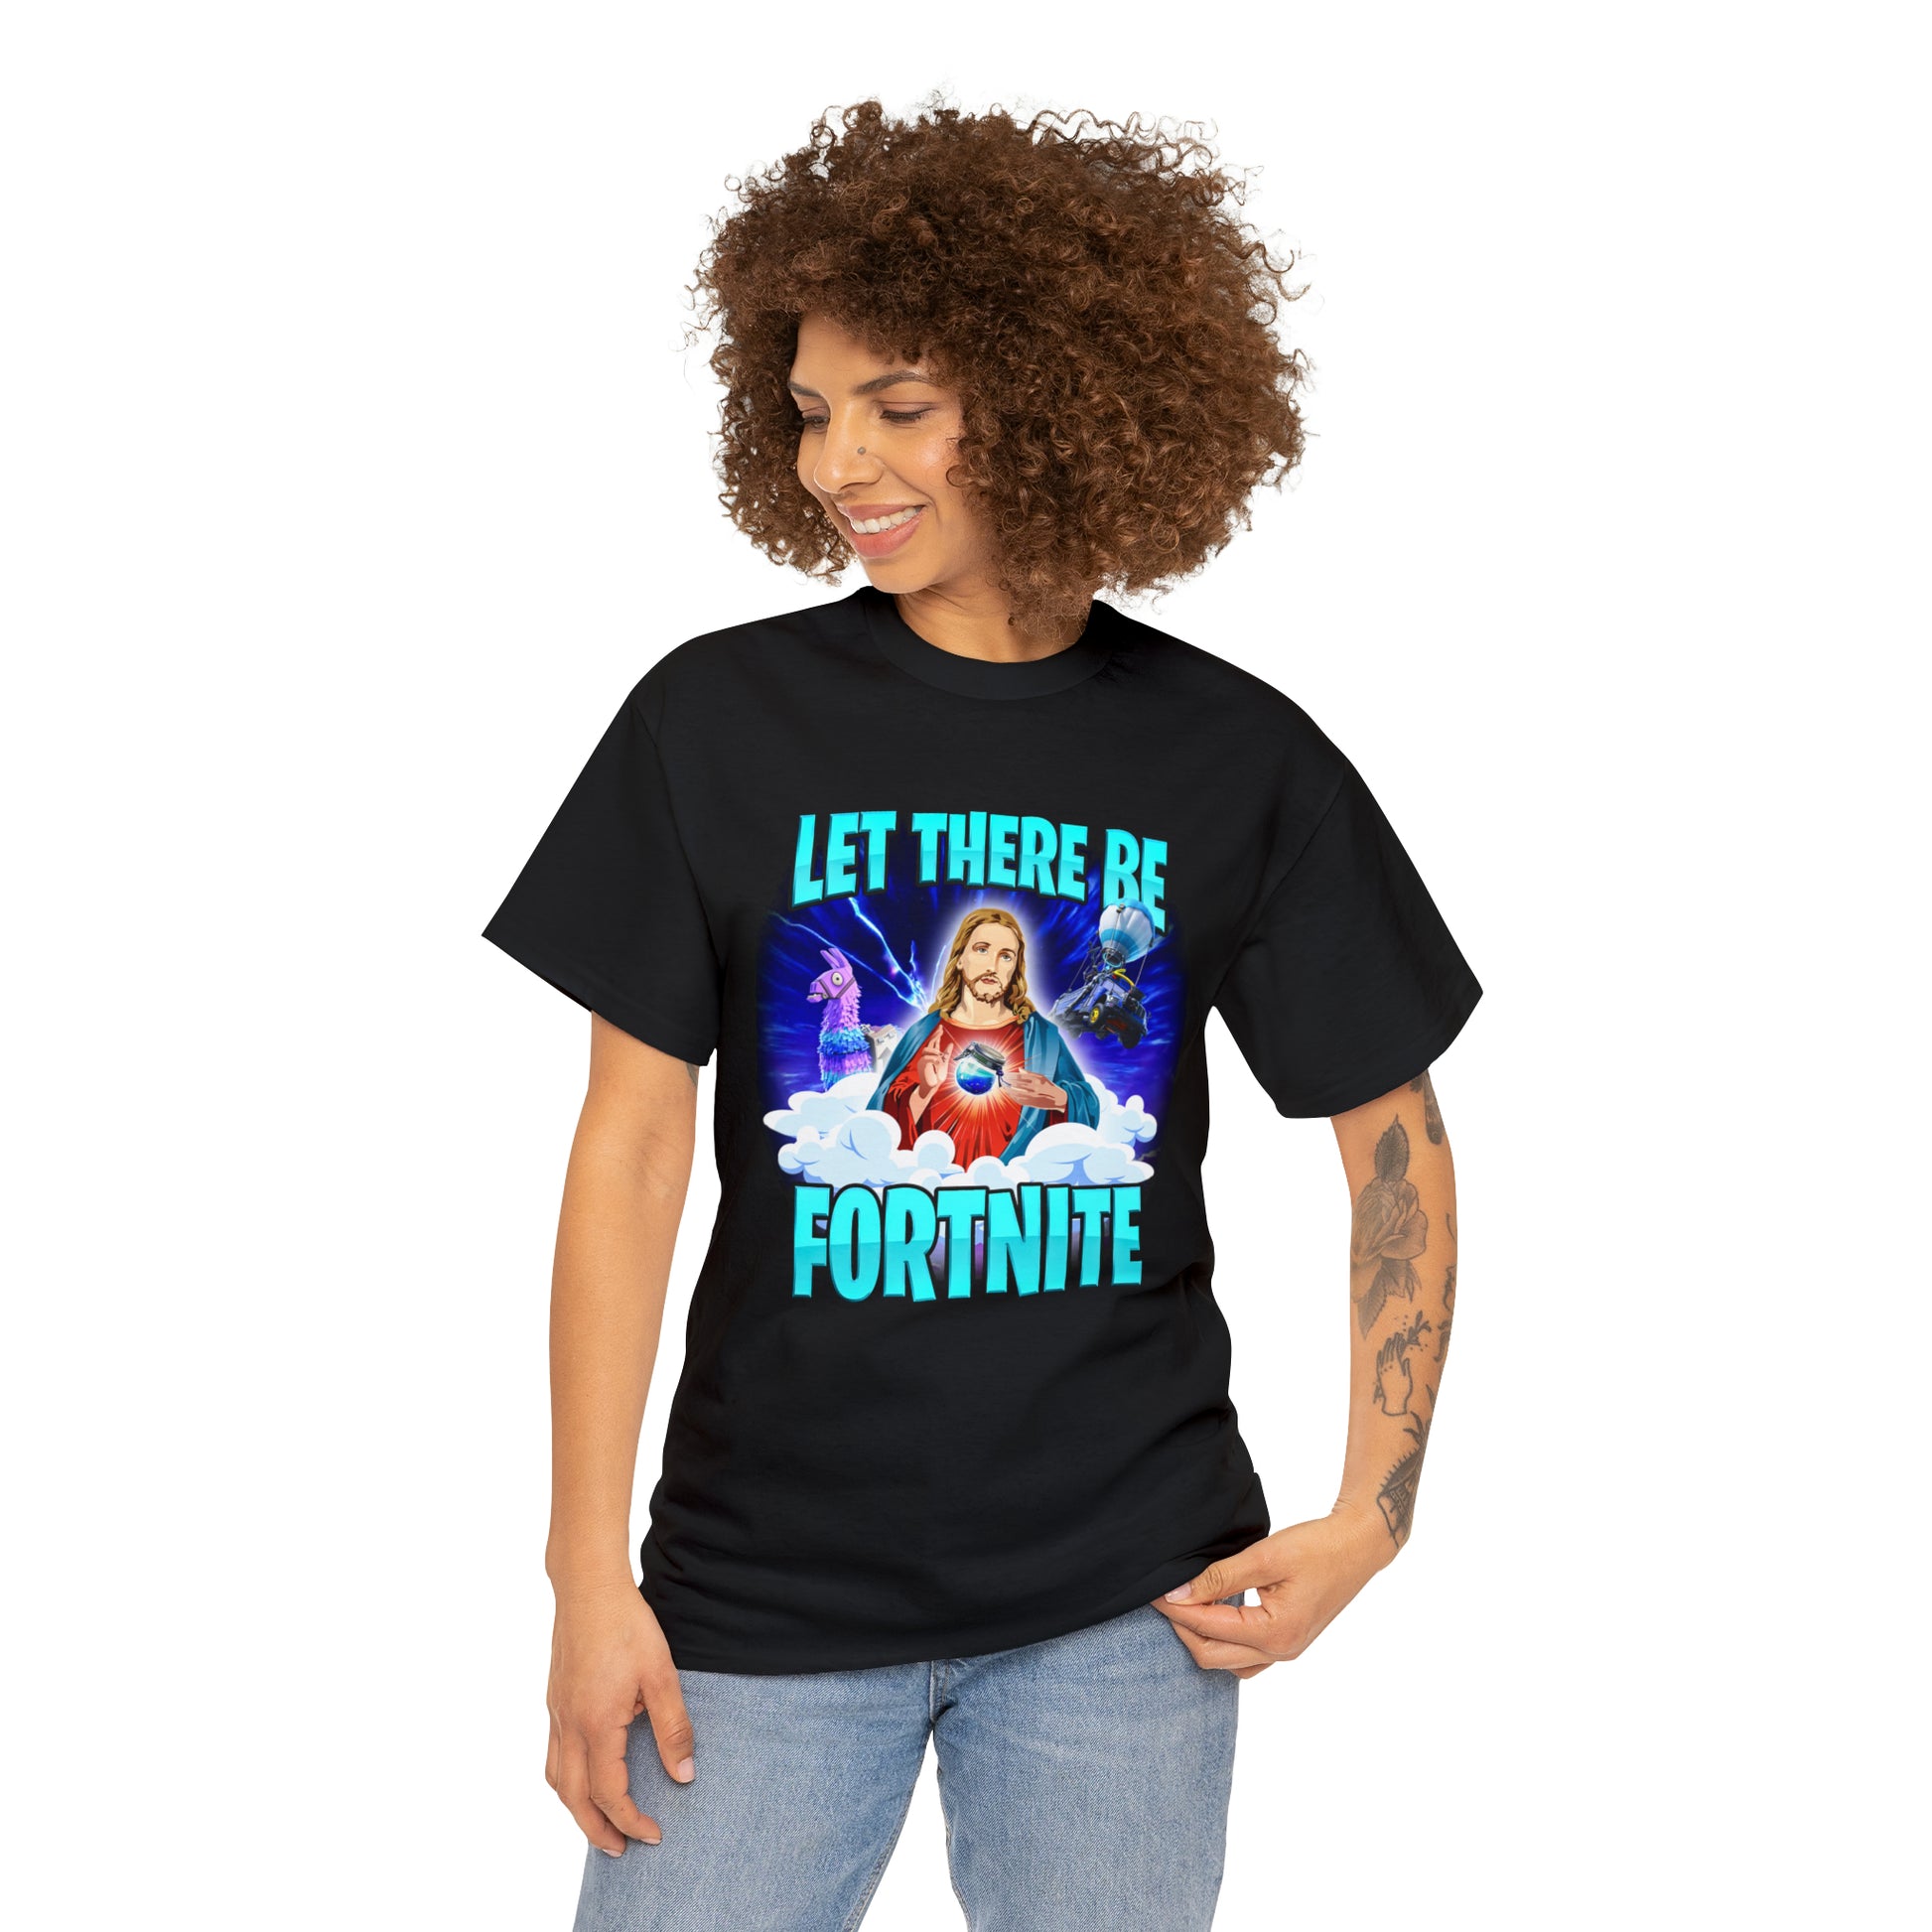 Let There Be Fortnite T-Shirt! – Not Safe for Wear!